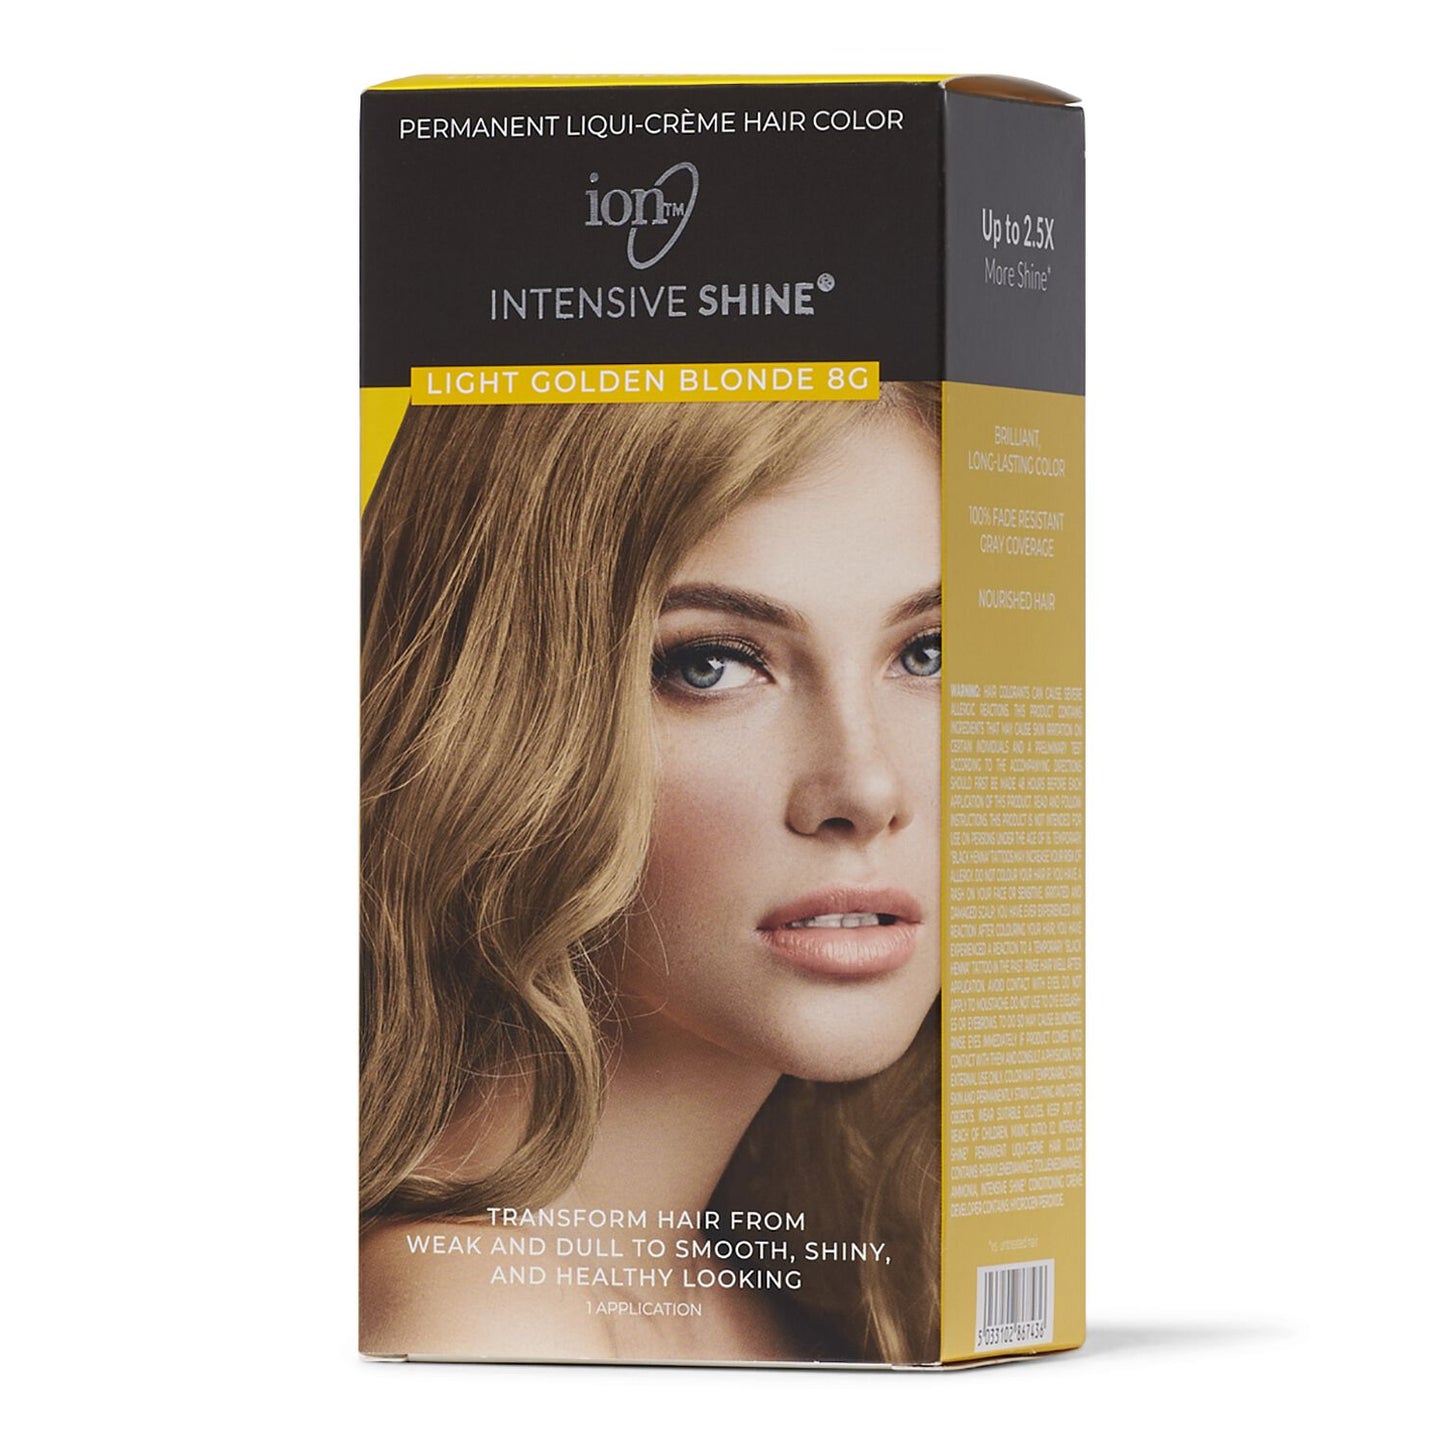 Intensive Shine  by   ion Intensive Shine Hair Color Kit Light Golden Blonde 8G